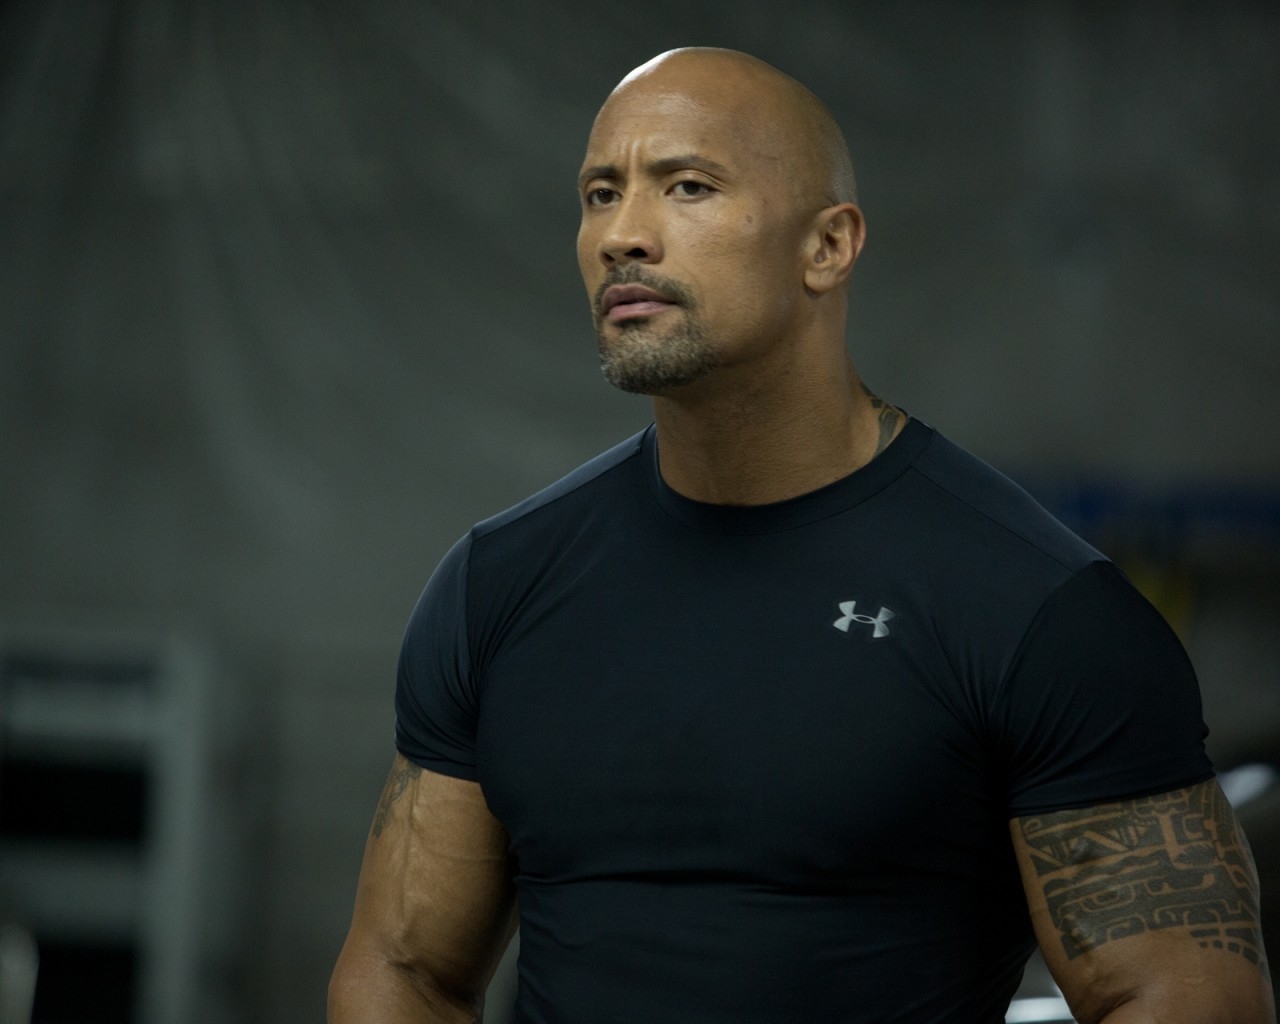 Dwayne Johnson Fast and Furious 6 for 1280 x 1024 resolution